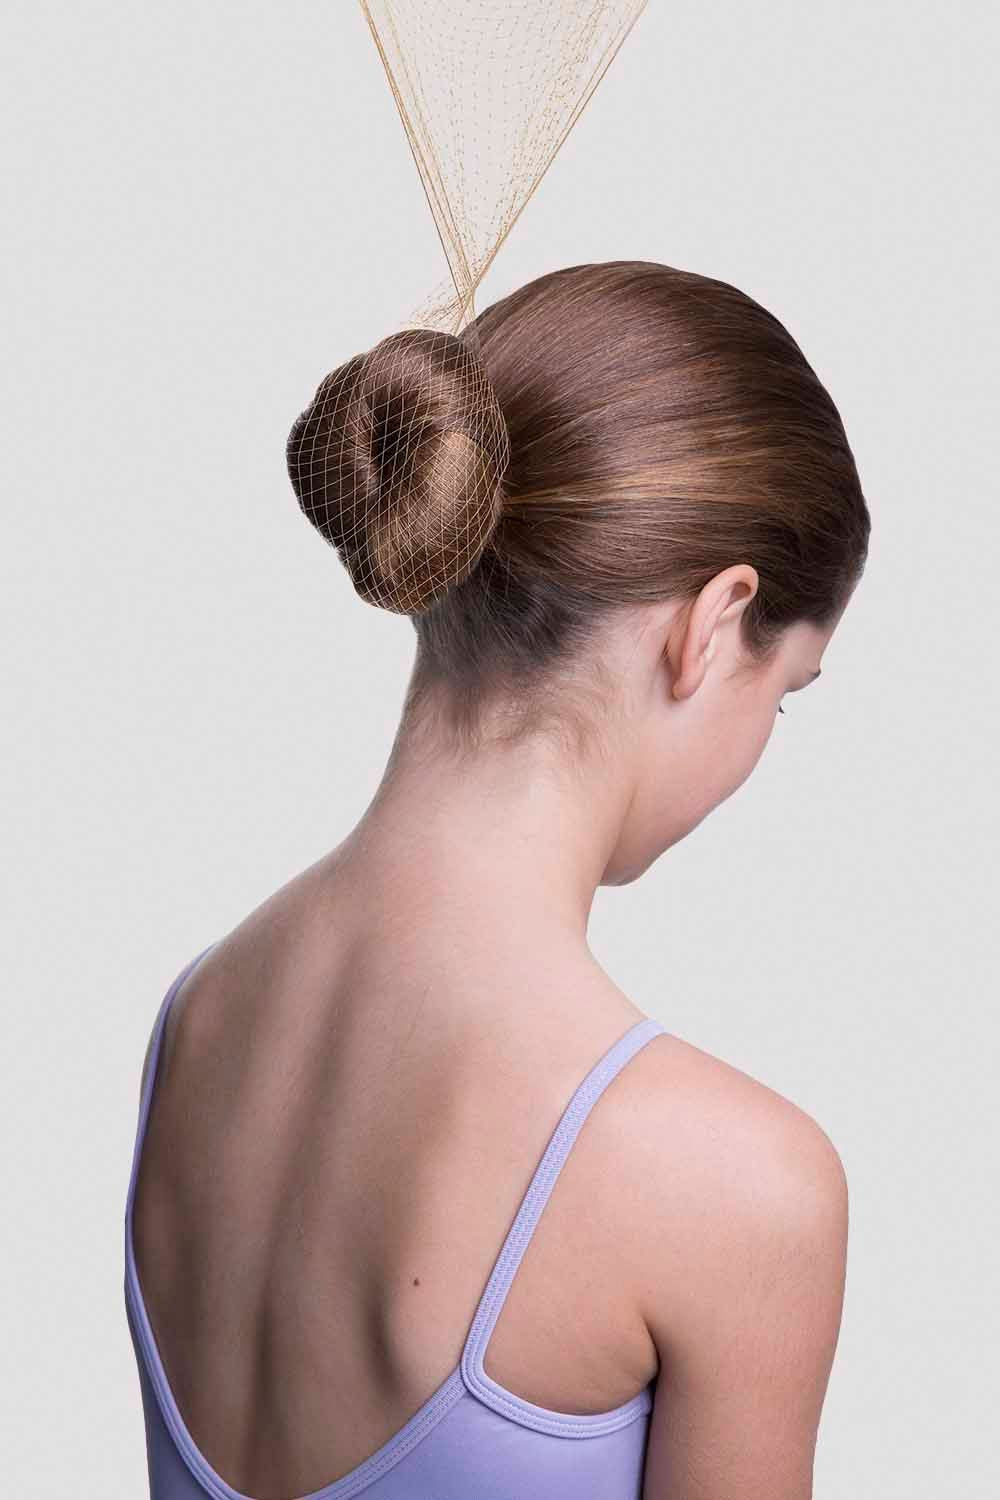 15 Ballerina Buns That Bring the Balletcore Trend to Your Hair